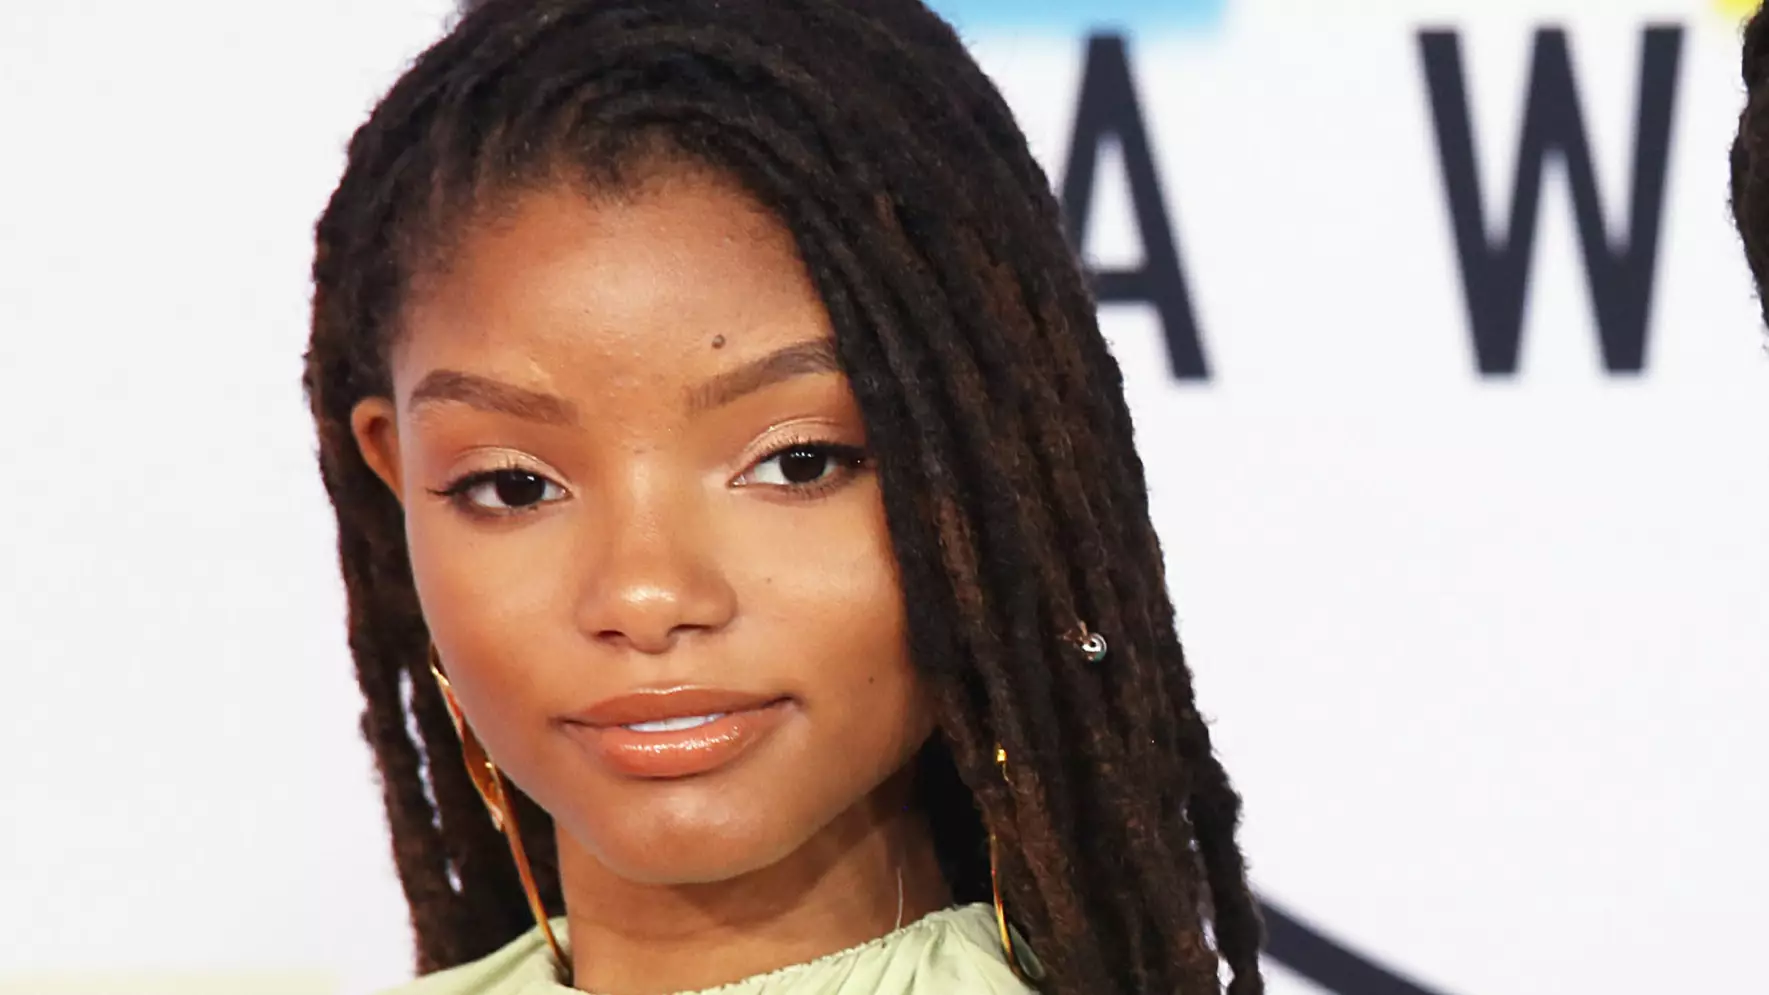 Halle Bailey Will Play Ariel In Disney's Live-Action ‘Little Mermaid’ Remake